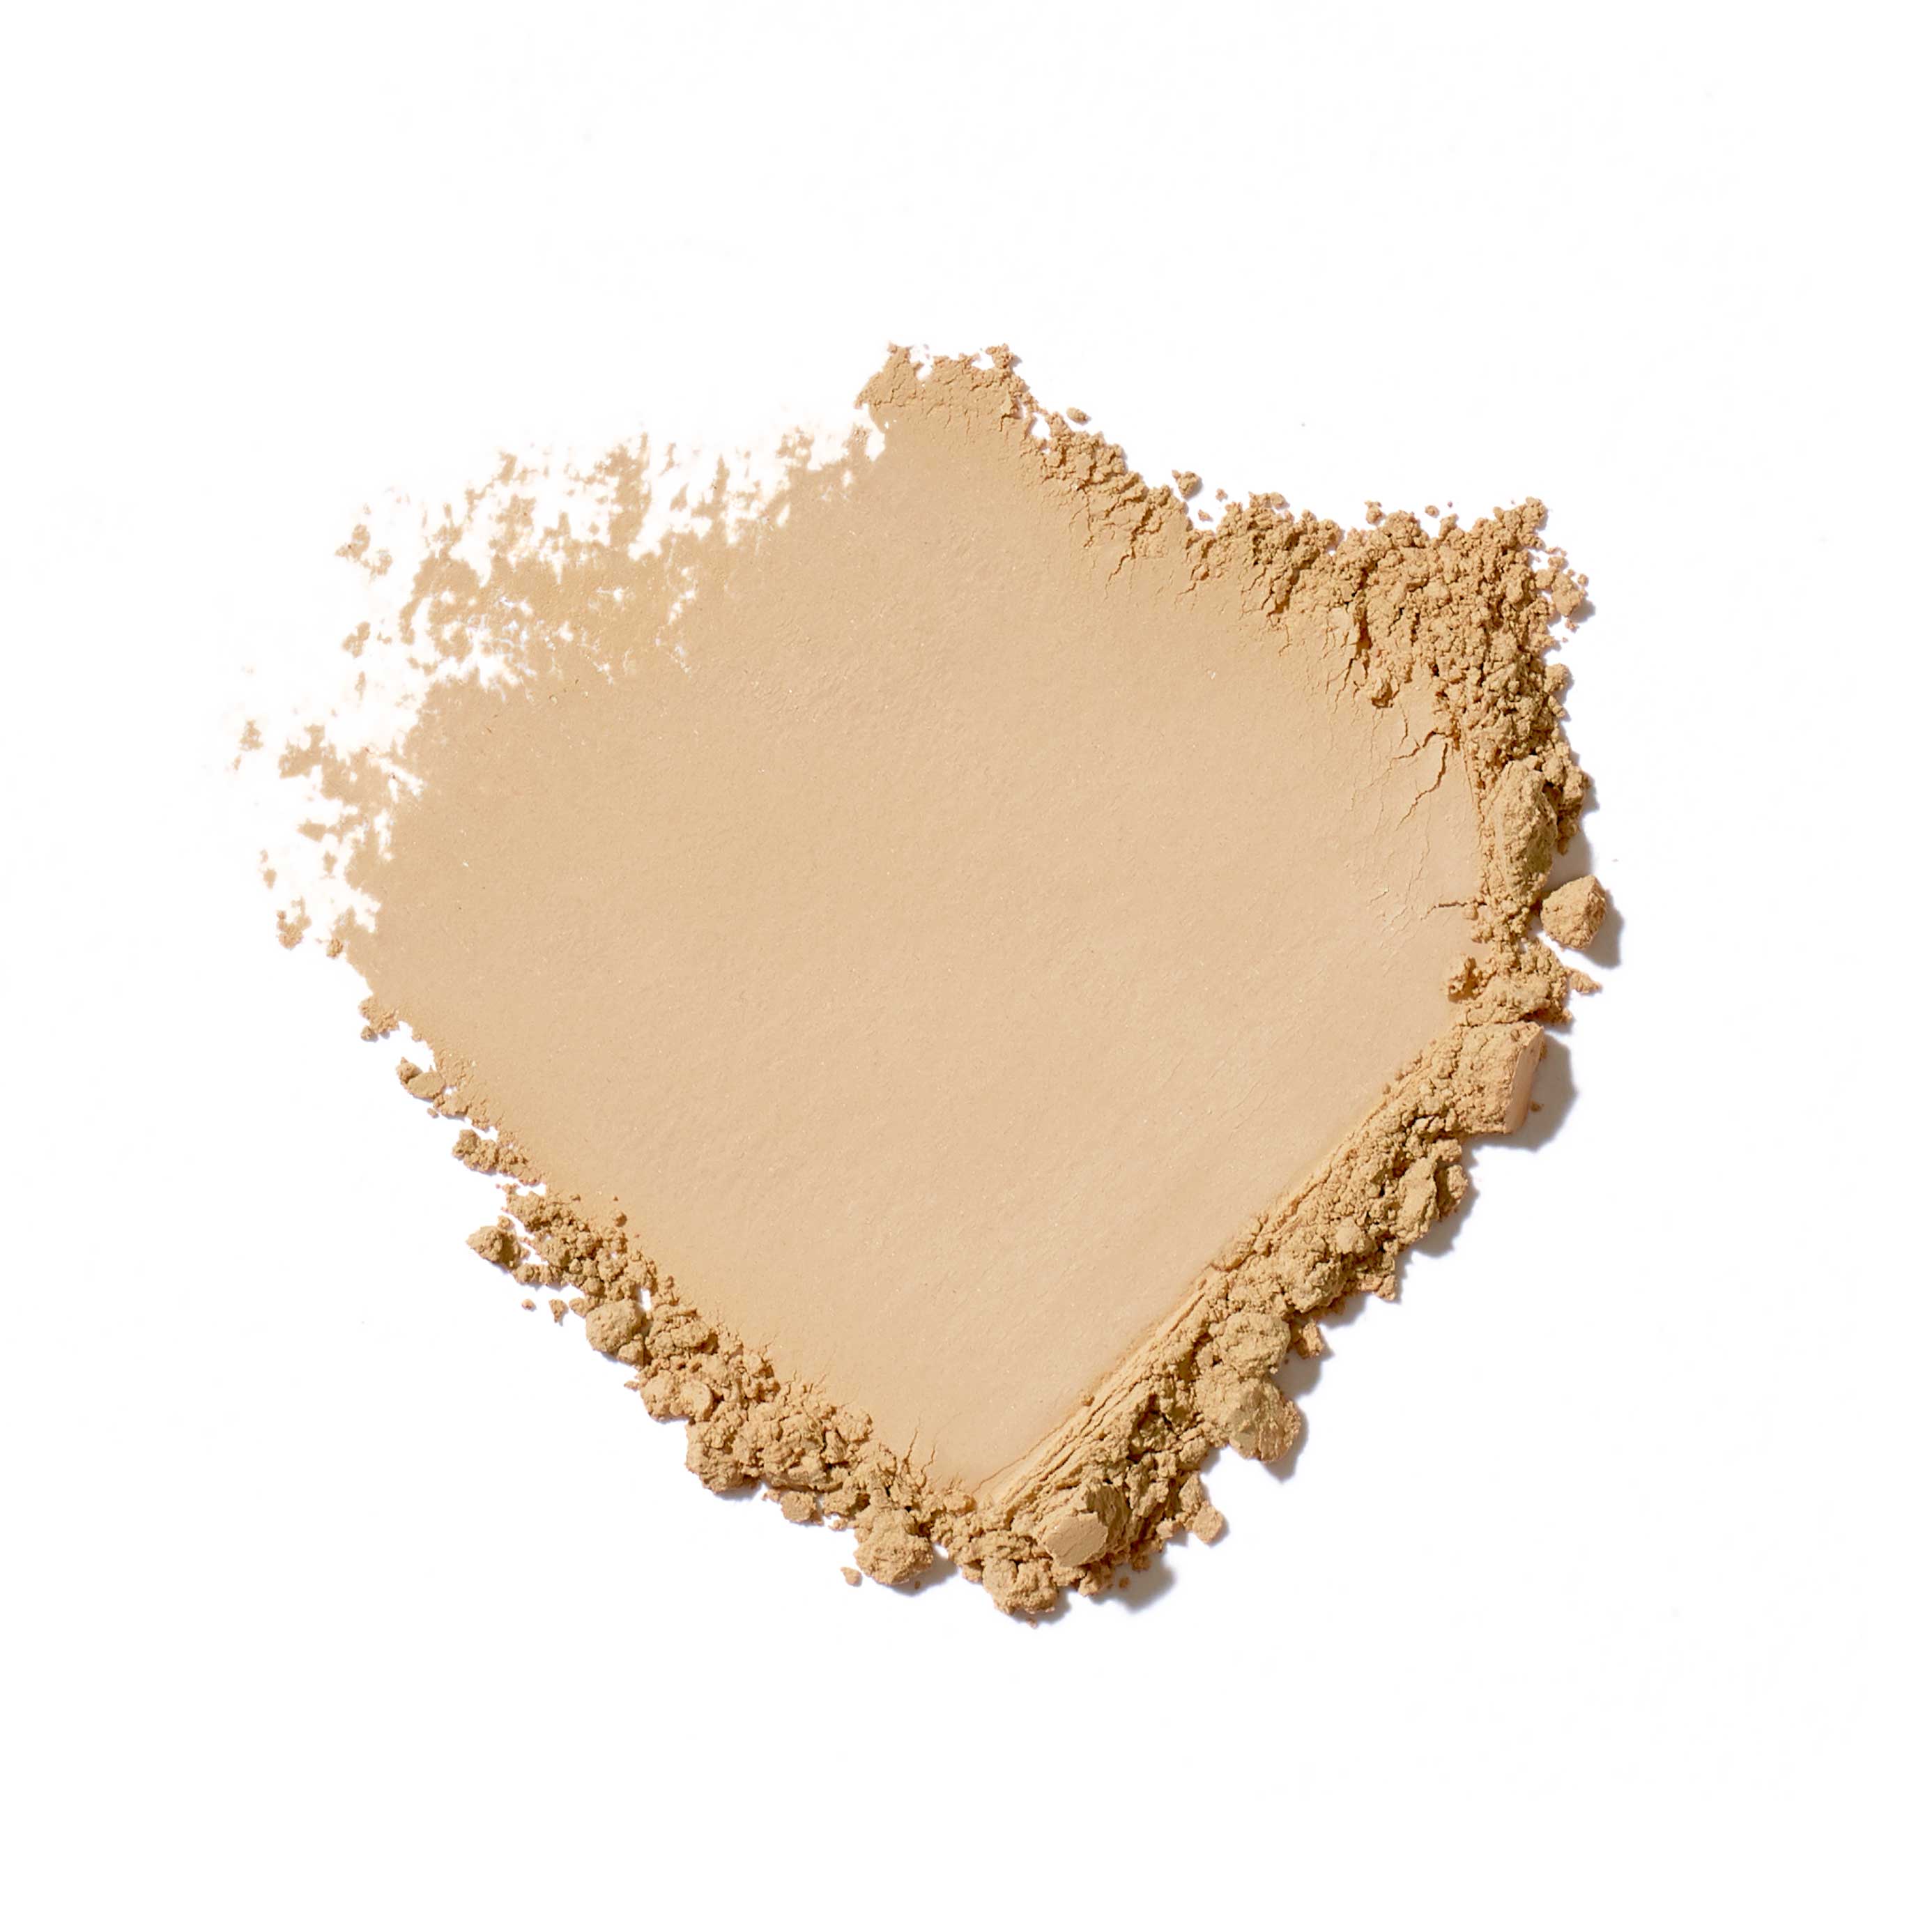 Amazing Base® Loose Mineral Powder Refillable Brush SPF 20/15 [Best before: Jan 2025]